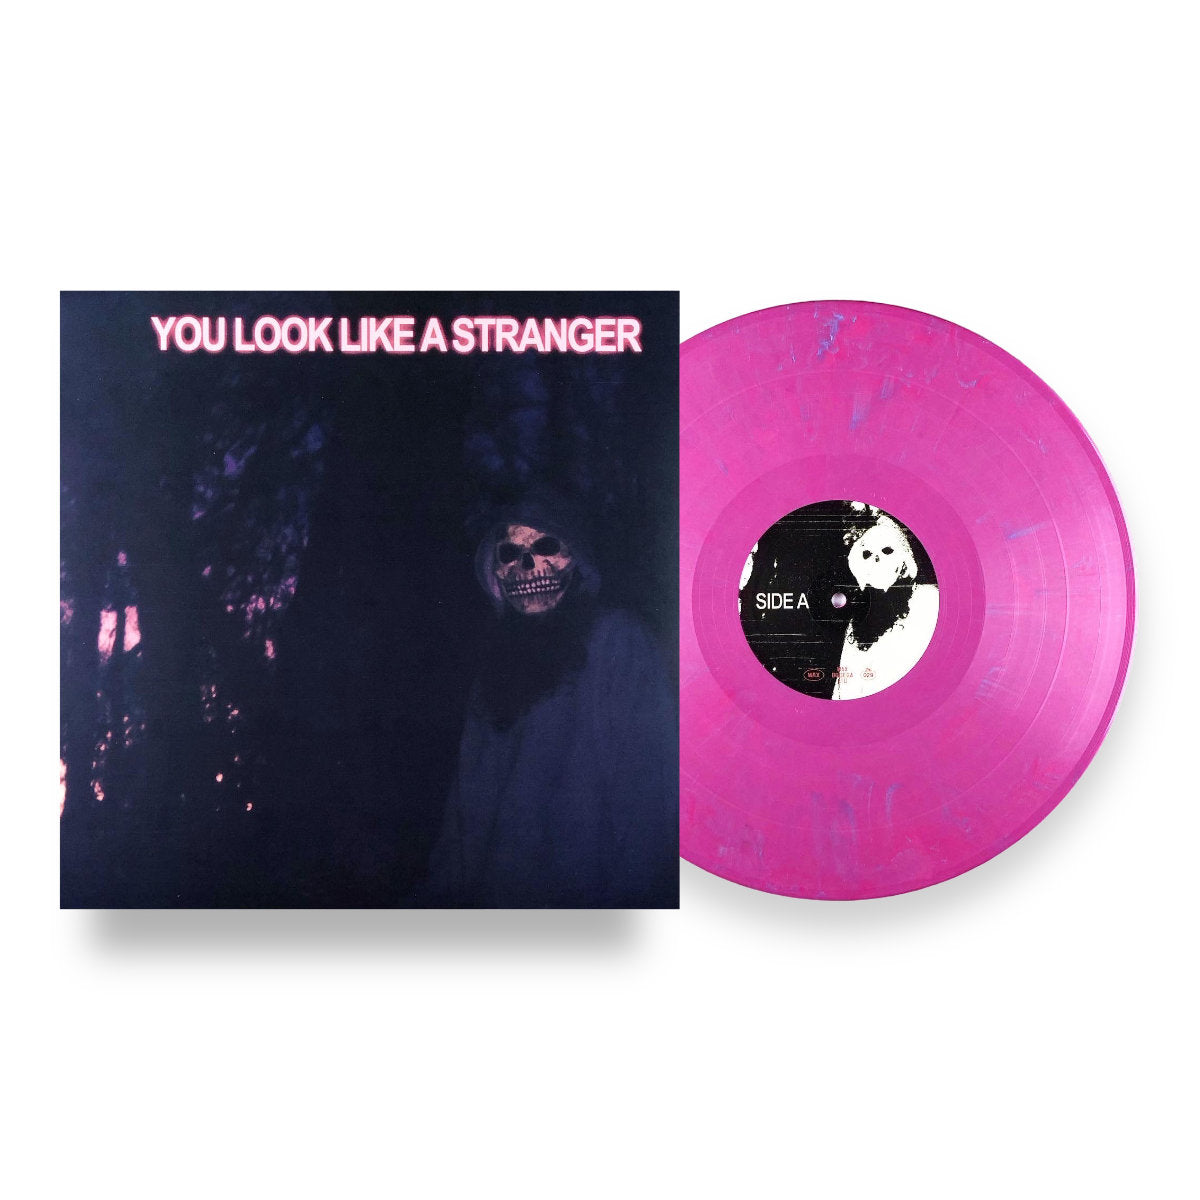 Mat Kerekes - You Look Like A Stranger: Limited Blue and Pink Marble Vinyl LP